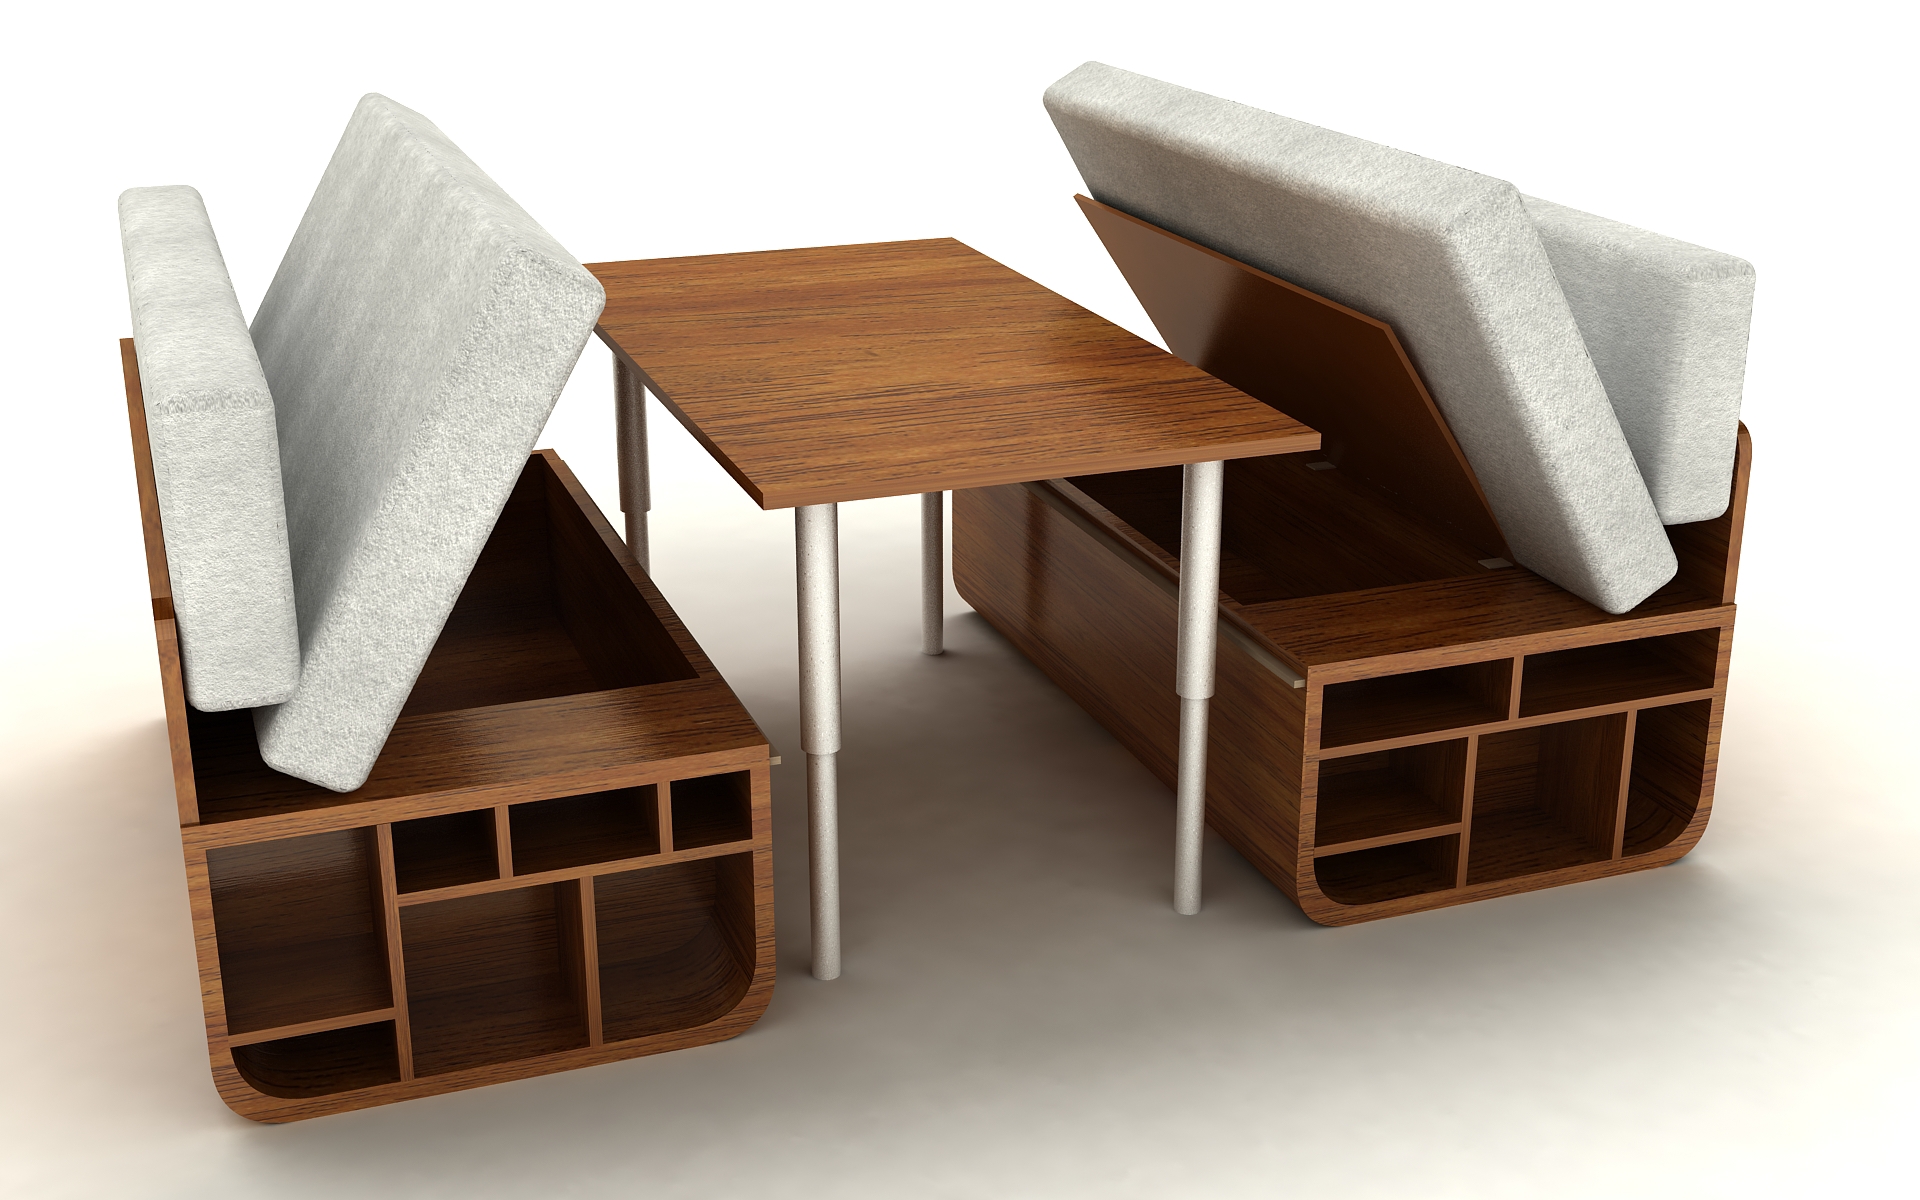 Multifunctional Furniture Design: Maximizing Space And Functionality